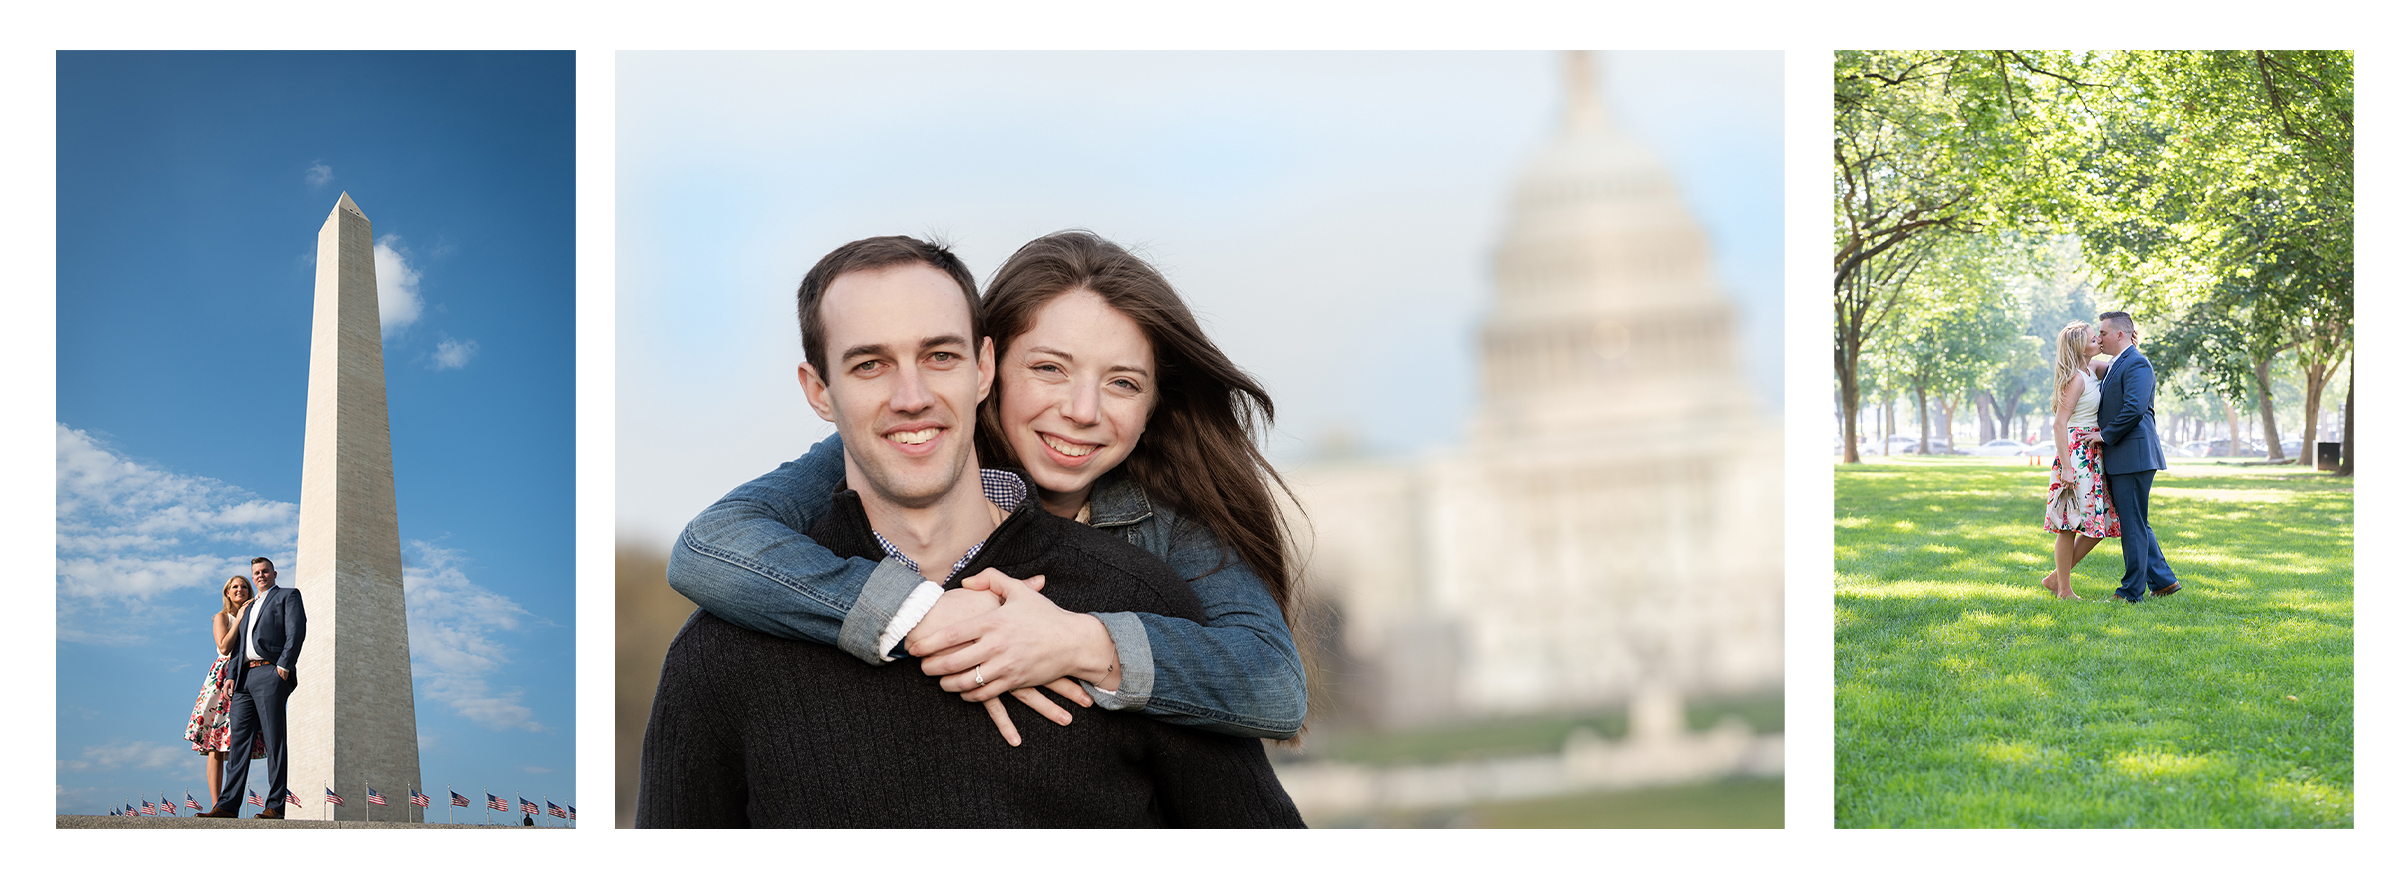 Engagement photos on the National Mall DC